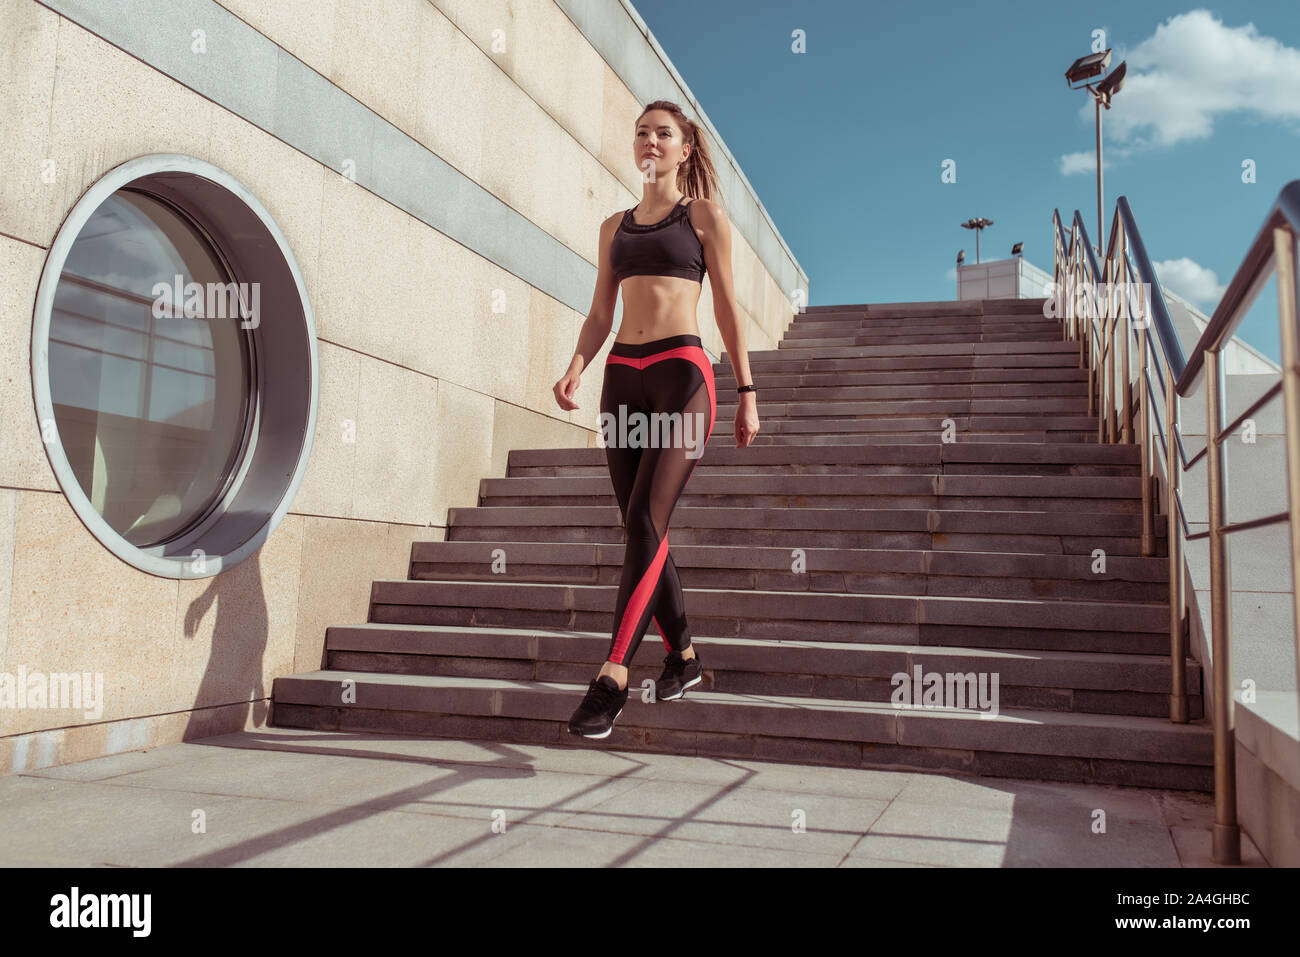 Sports girl goes in summer city. Sportswear Leggings Top. Step background. Motivation  for fitness workout lifestyle. Free space text. Tanned and slim Stock Photo  - Alamy